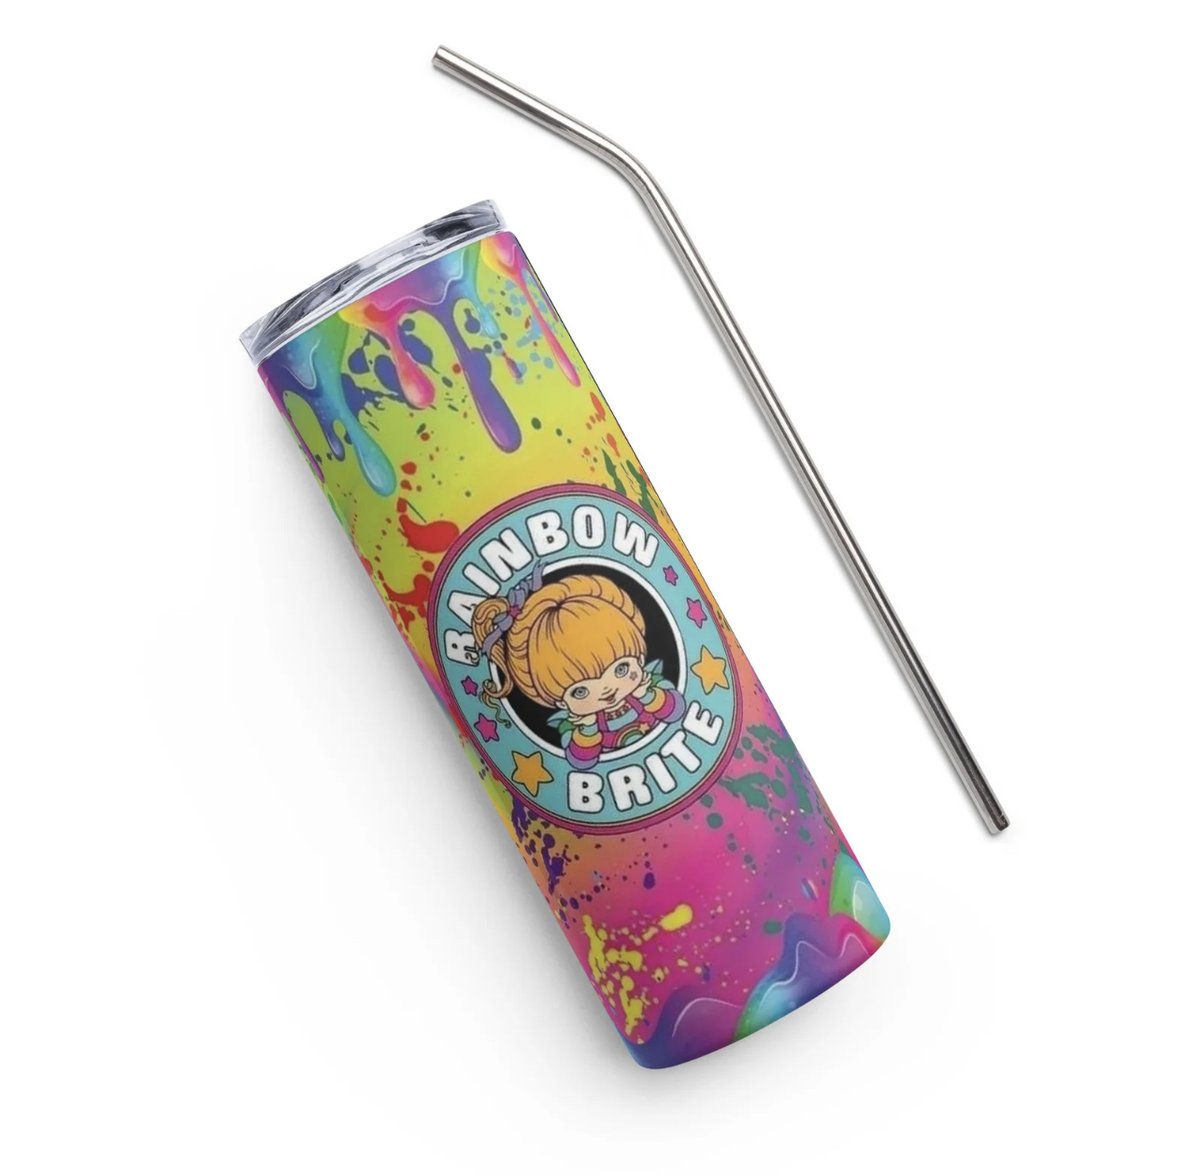 Retro Rainbow Brite Skinny Tumbler!!! Perfect for the 80's kids out there!!! $40.00 includes shipping in the US!!!

#rainbowbrite #rainbow #retro #80skids #80s #Rainbowdrip 
#skinnytumbler #skinnytumbler20oz #summer #summervibes #summerfun #musthave #traveltumbler